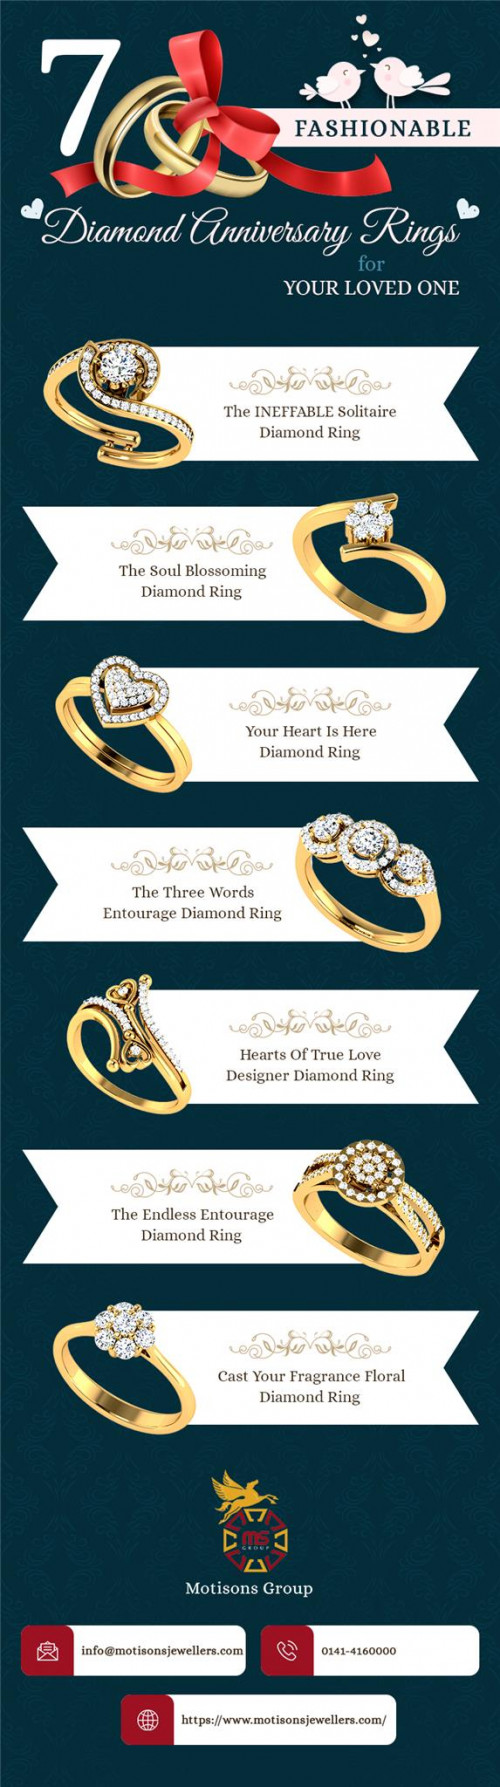 7-Fashionable-Diamond-Anniversary-Rings-for-your-Loved-One.jpg